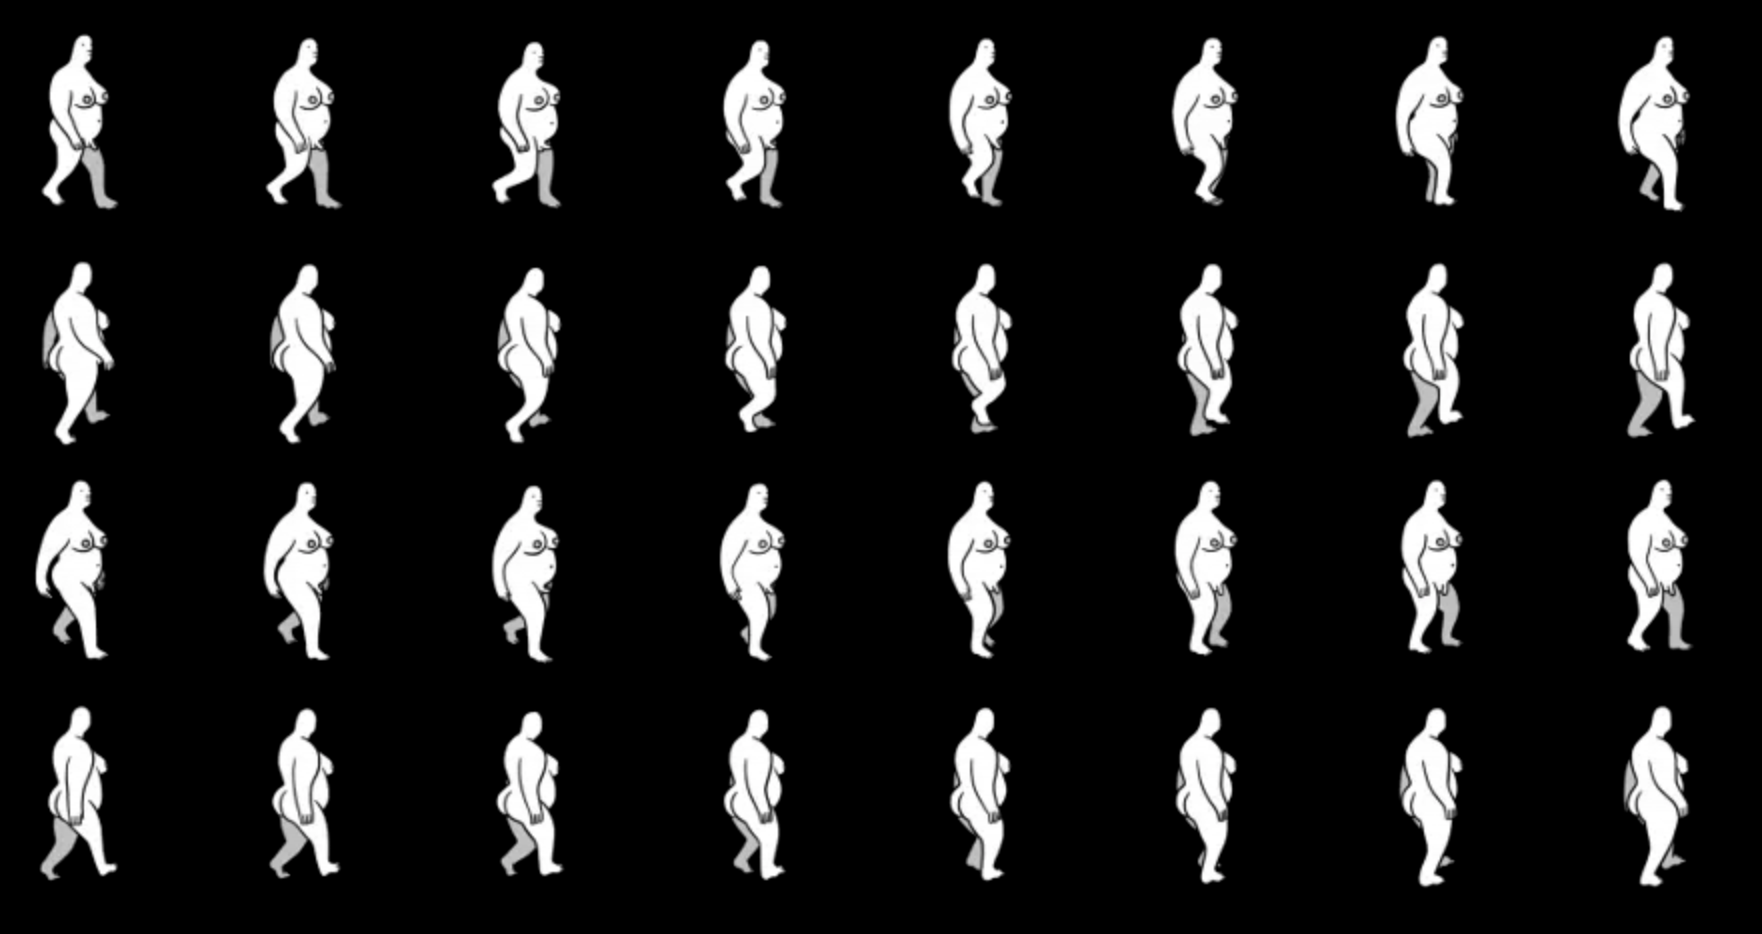 An image of the WIP character generation art from the MIF page on We Dwell in Possibility. It features 36 naked white figures who are lined up with eight of them in each row on a black background.